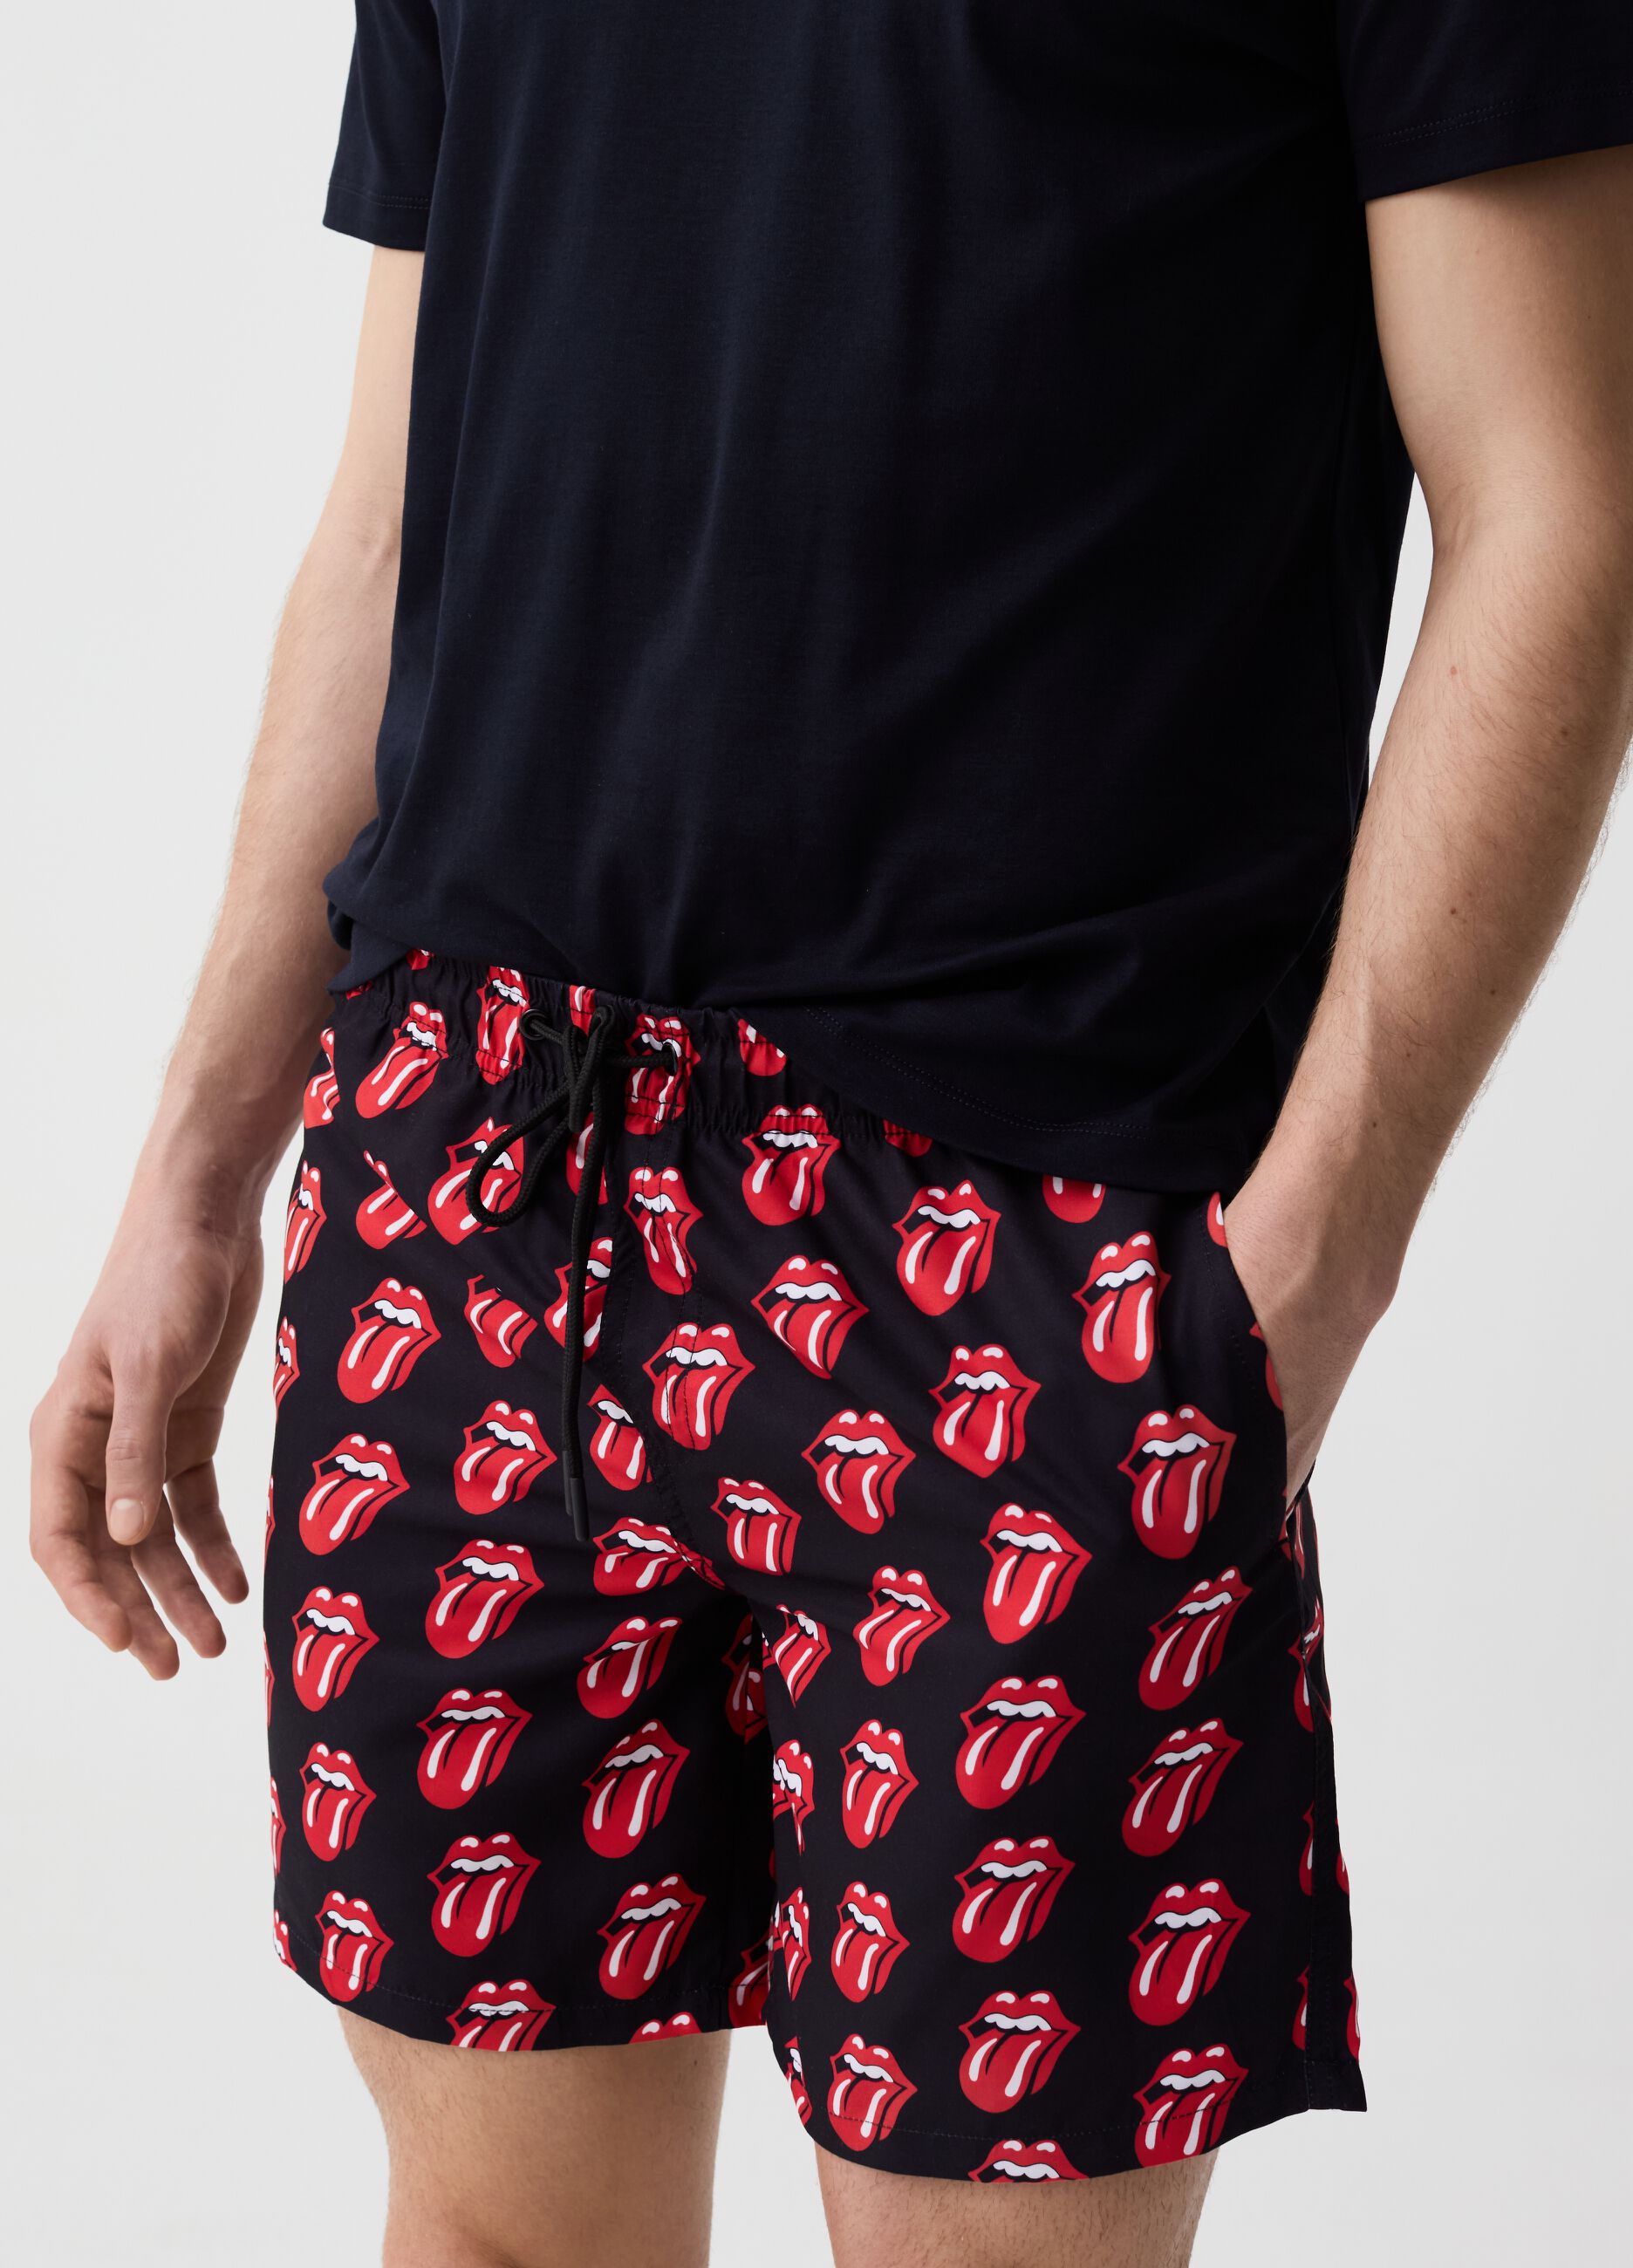 Swimming trunks with Rolling Stones print